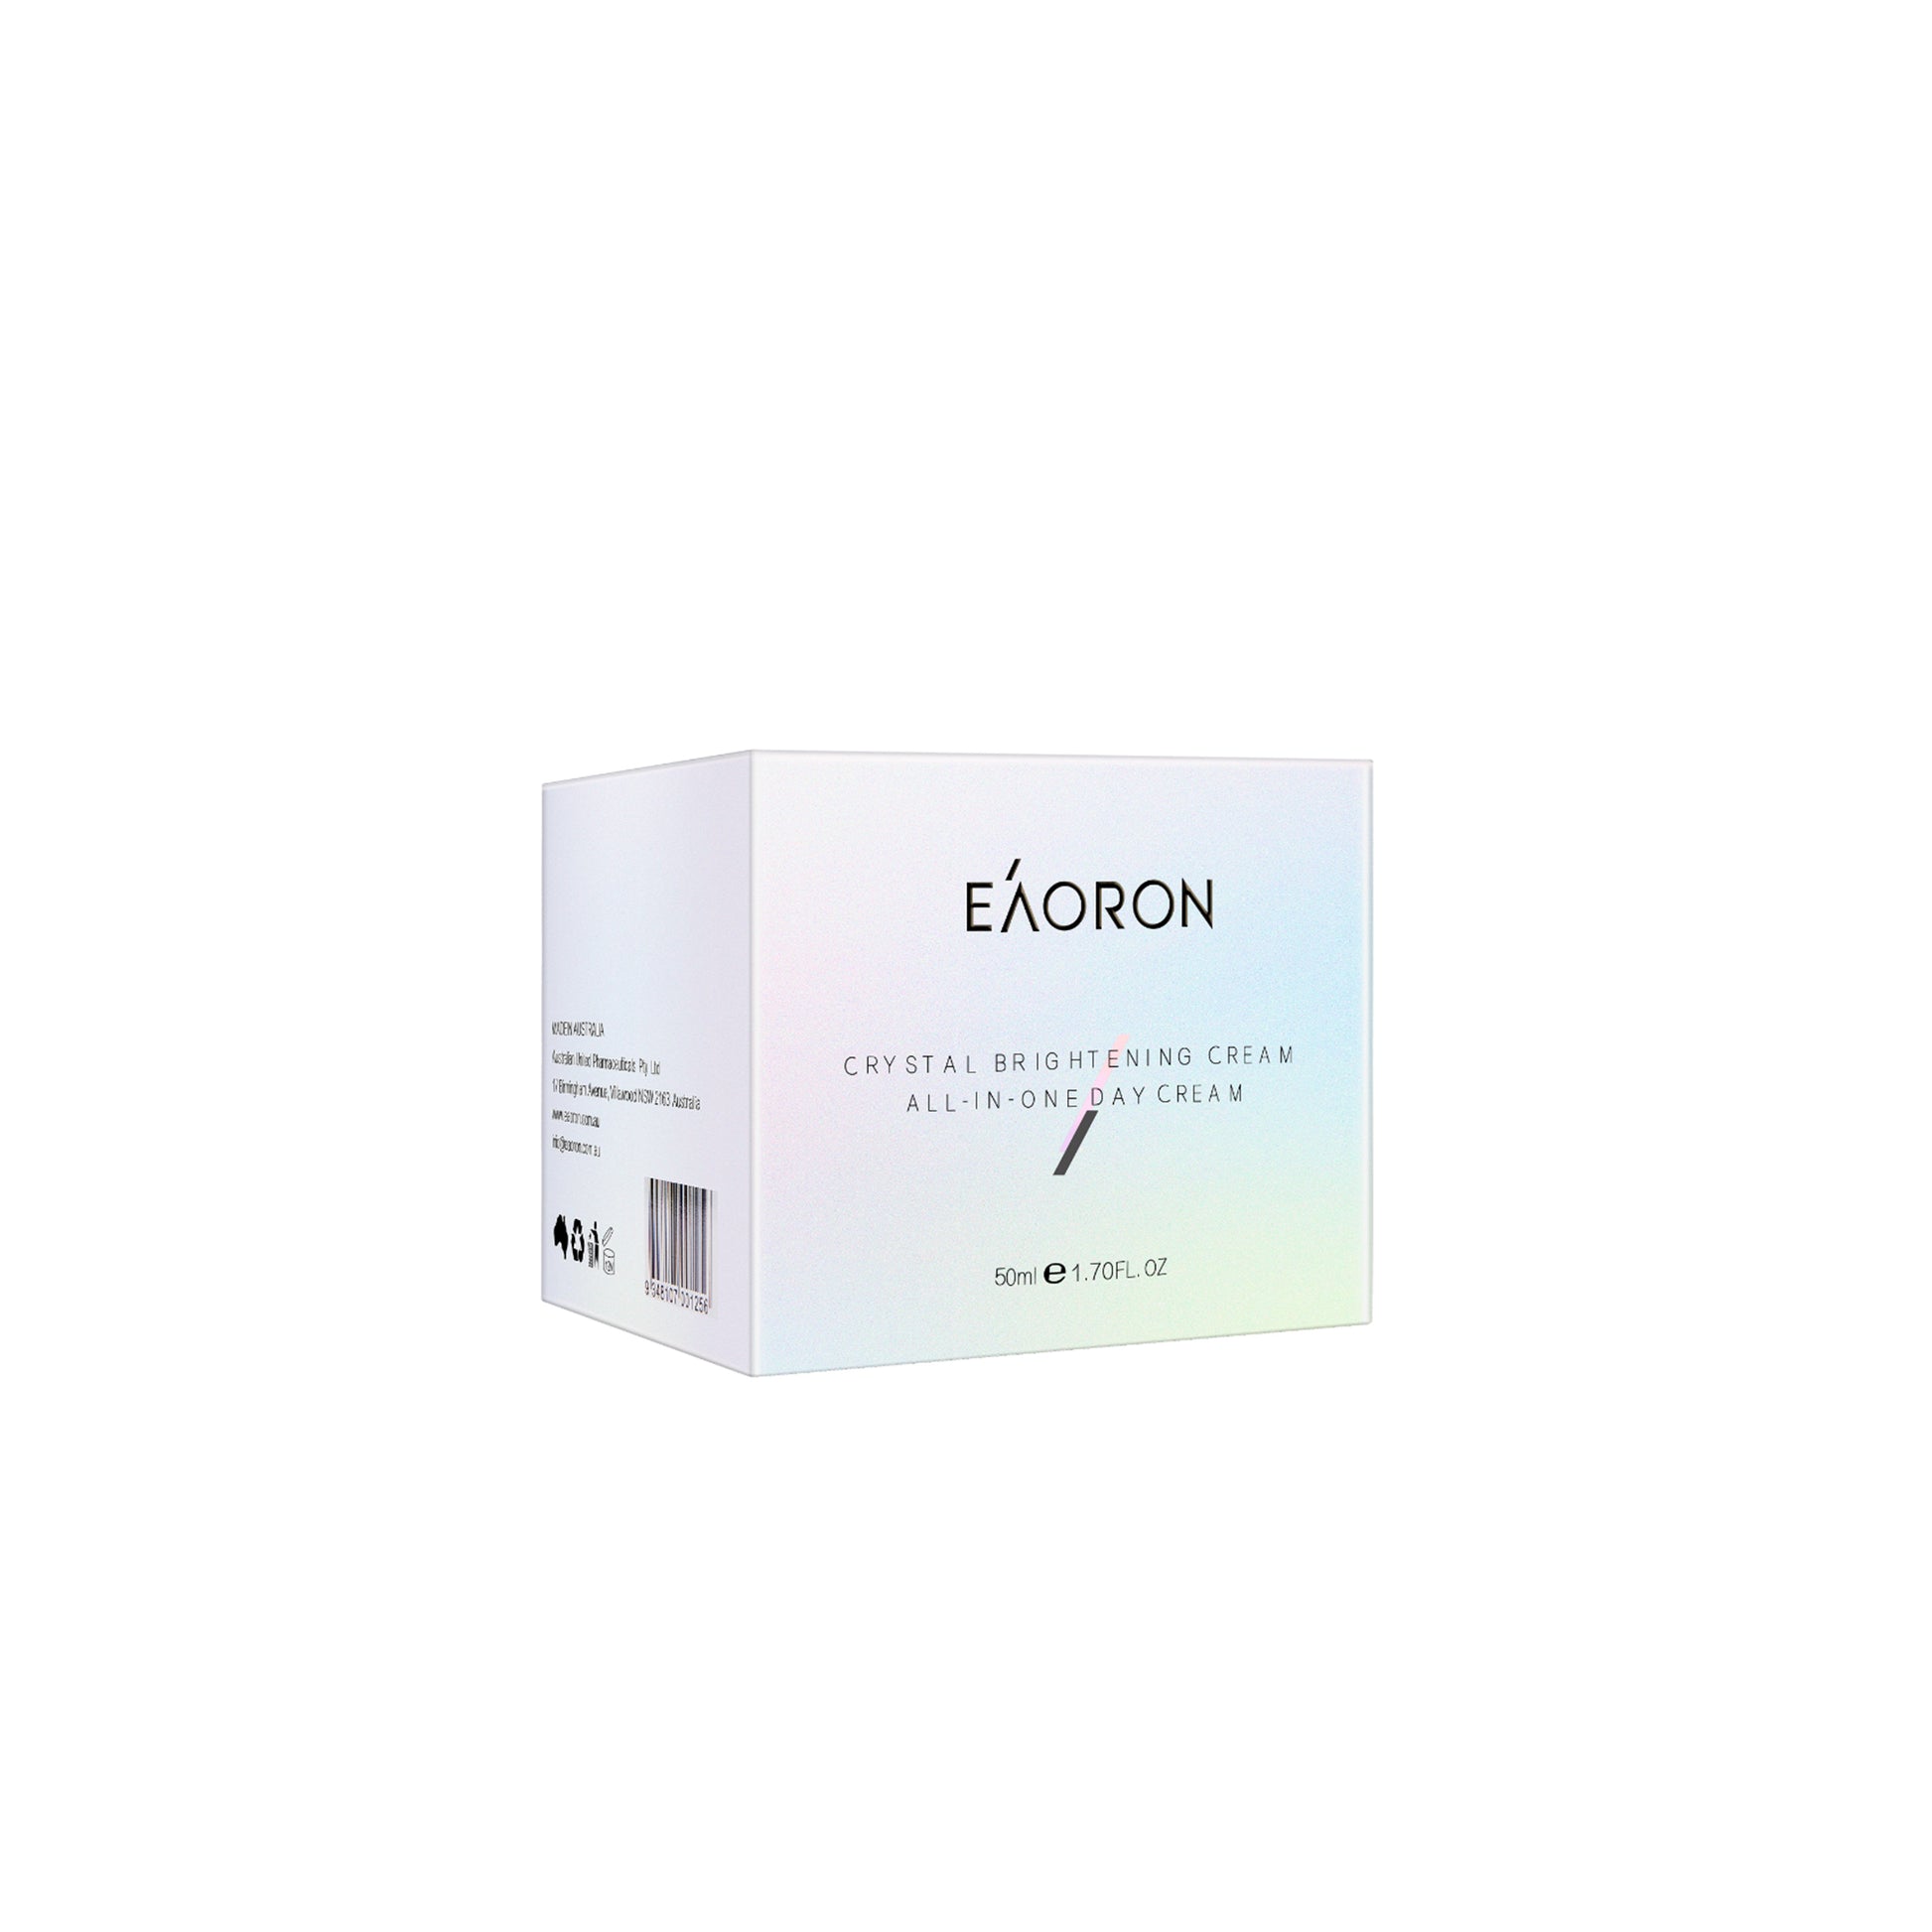 Crystal Brightening Cream All-In-One Day Cream - Eaoron | MLC Space